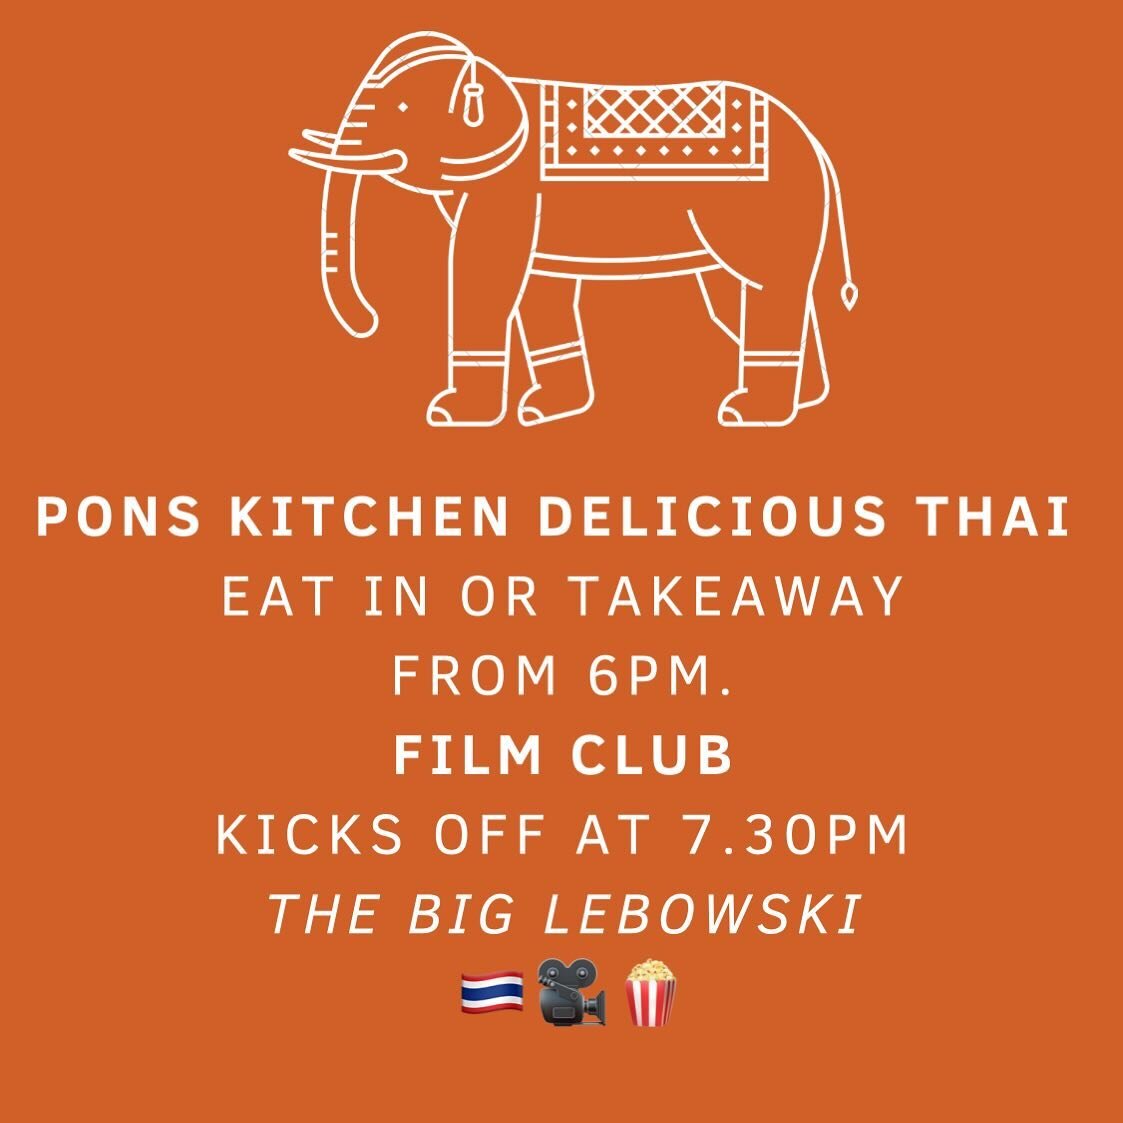 Pons Kitchen delicious Thai food will be open to eat in or takeaway tonight 3/4/24 from 6pm @ The Coorabell Hall. Film club pic of the month kicks off at 7.30pm The Big Lebowski, don&rsquo;t miss out on a great night of food and film